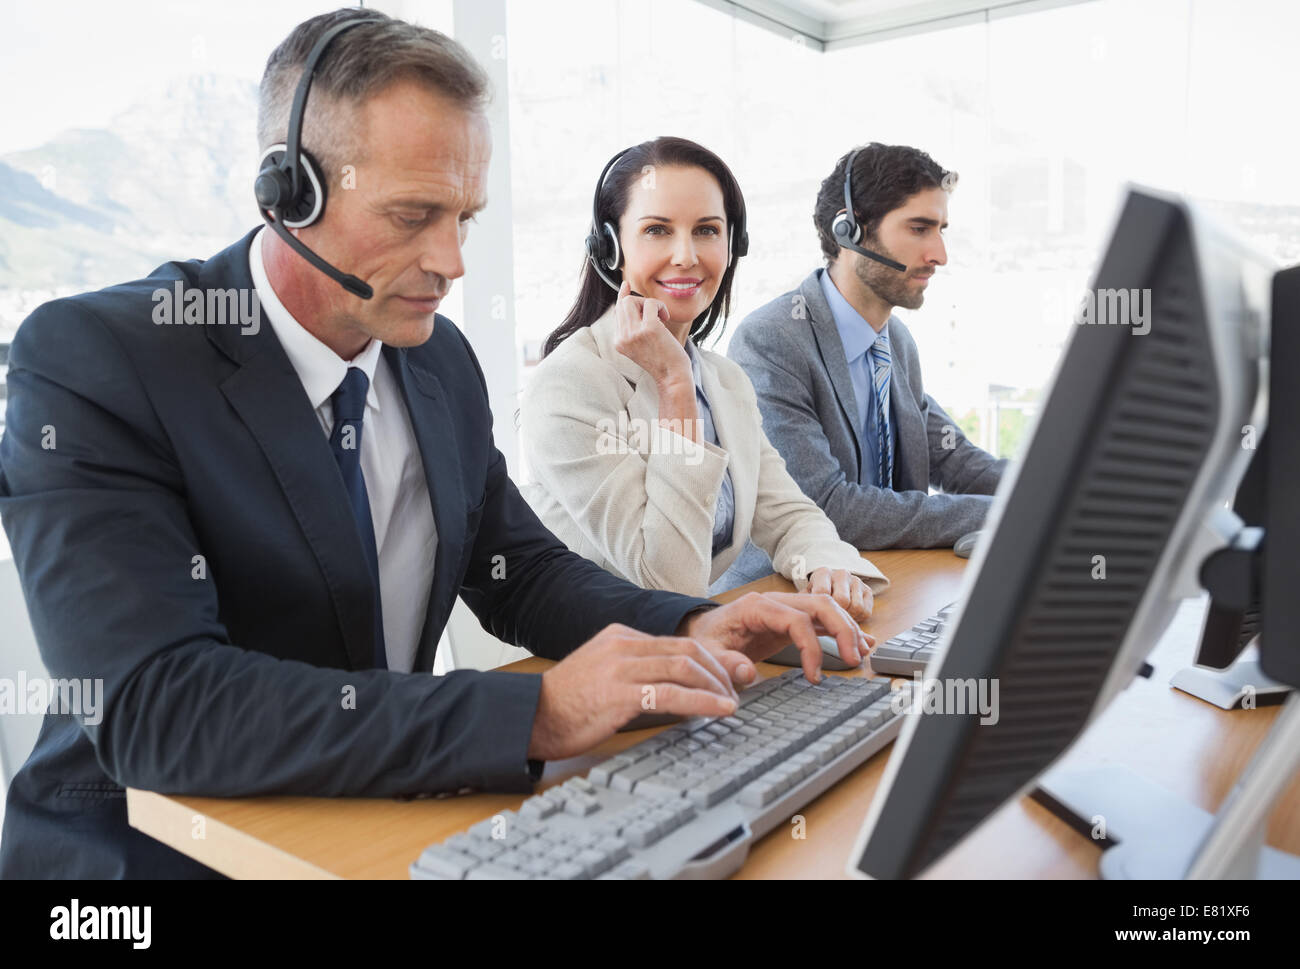 Smiling businesswoman working with teammates Stock Photo